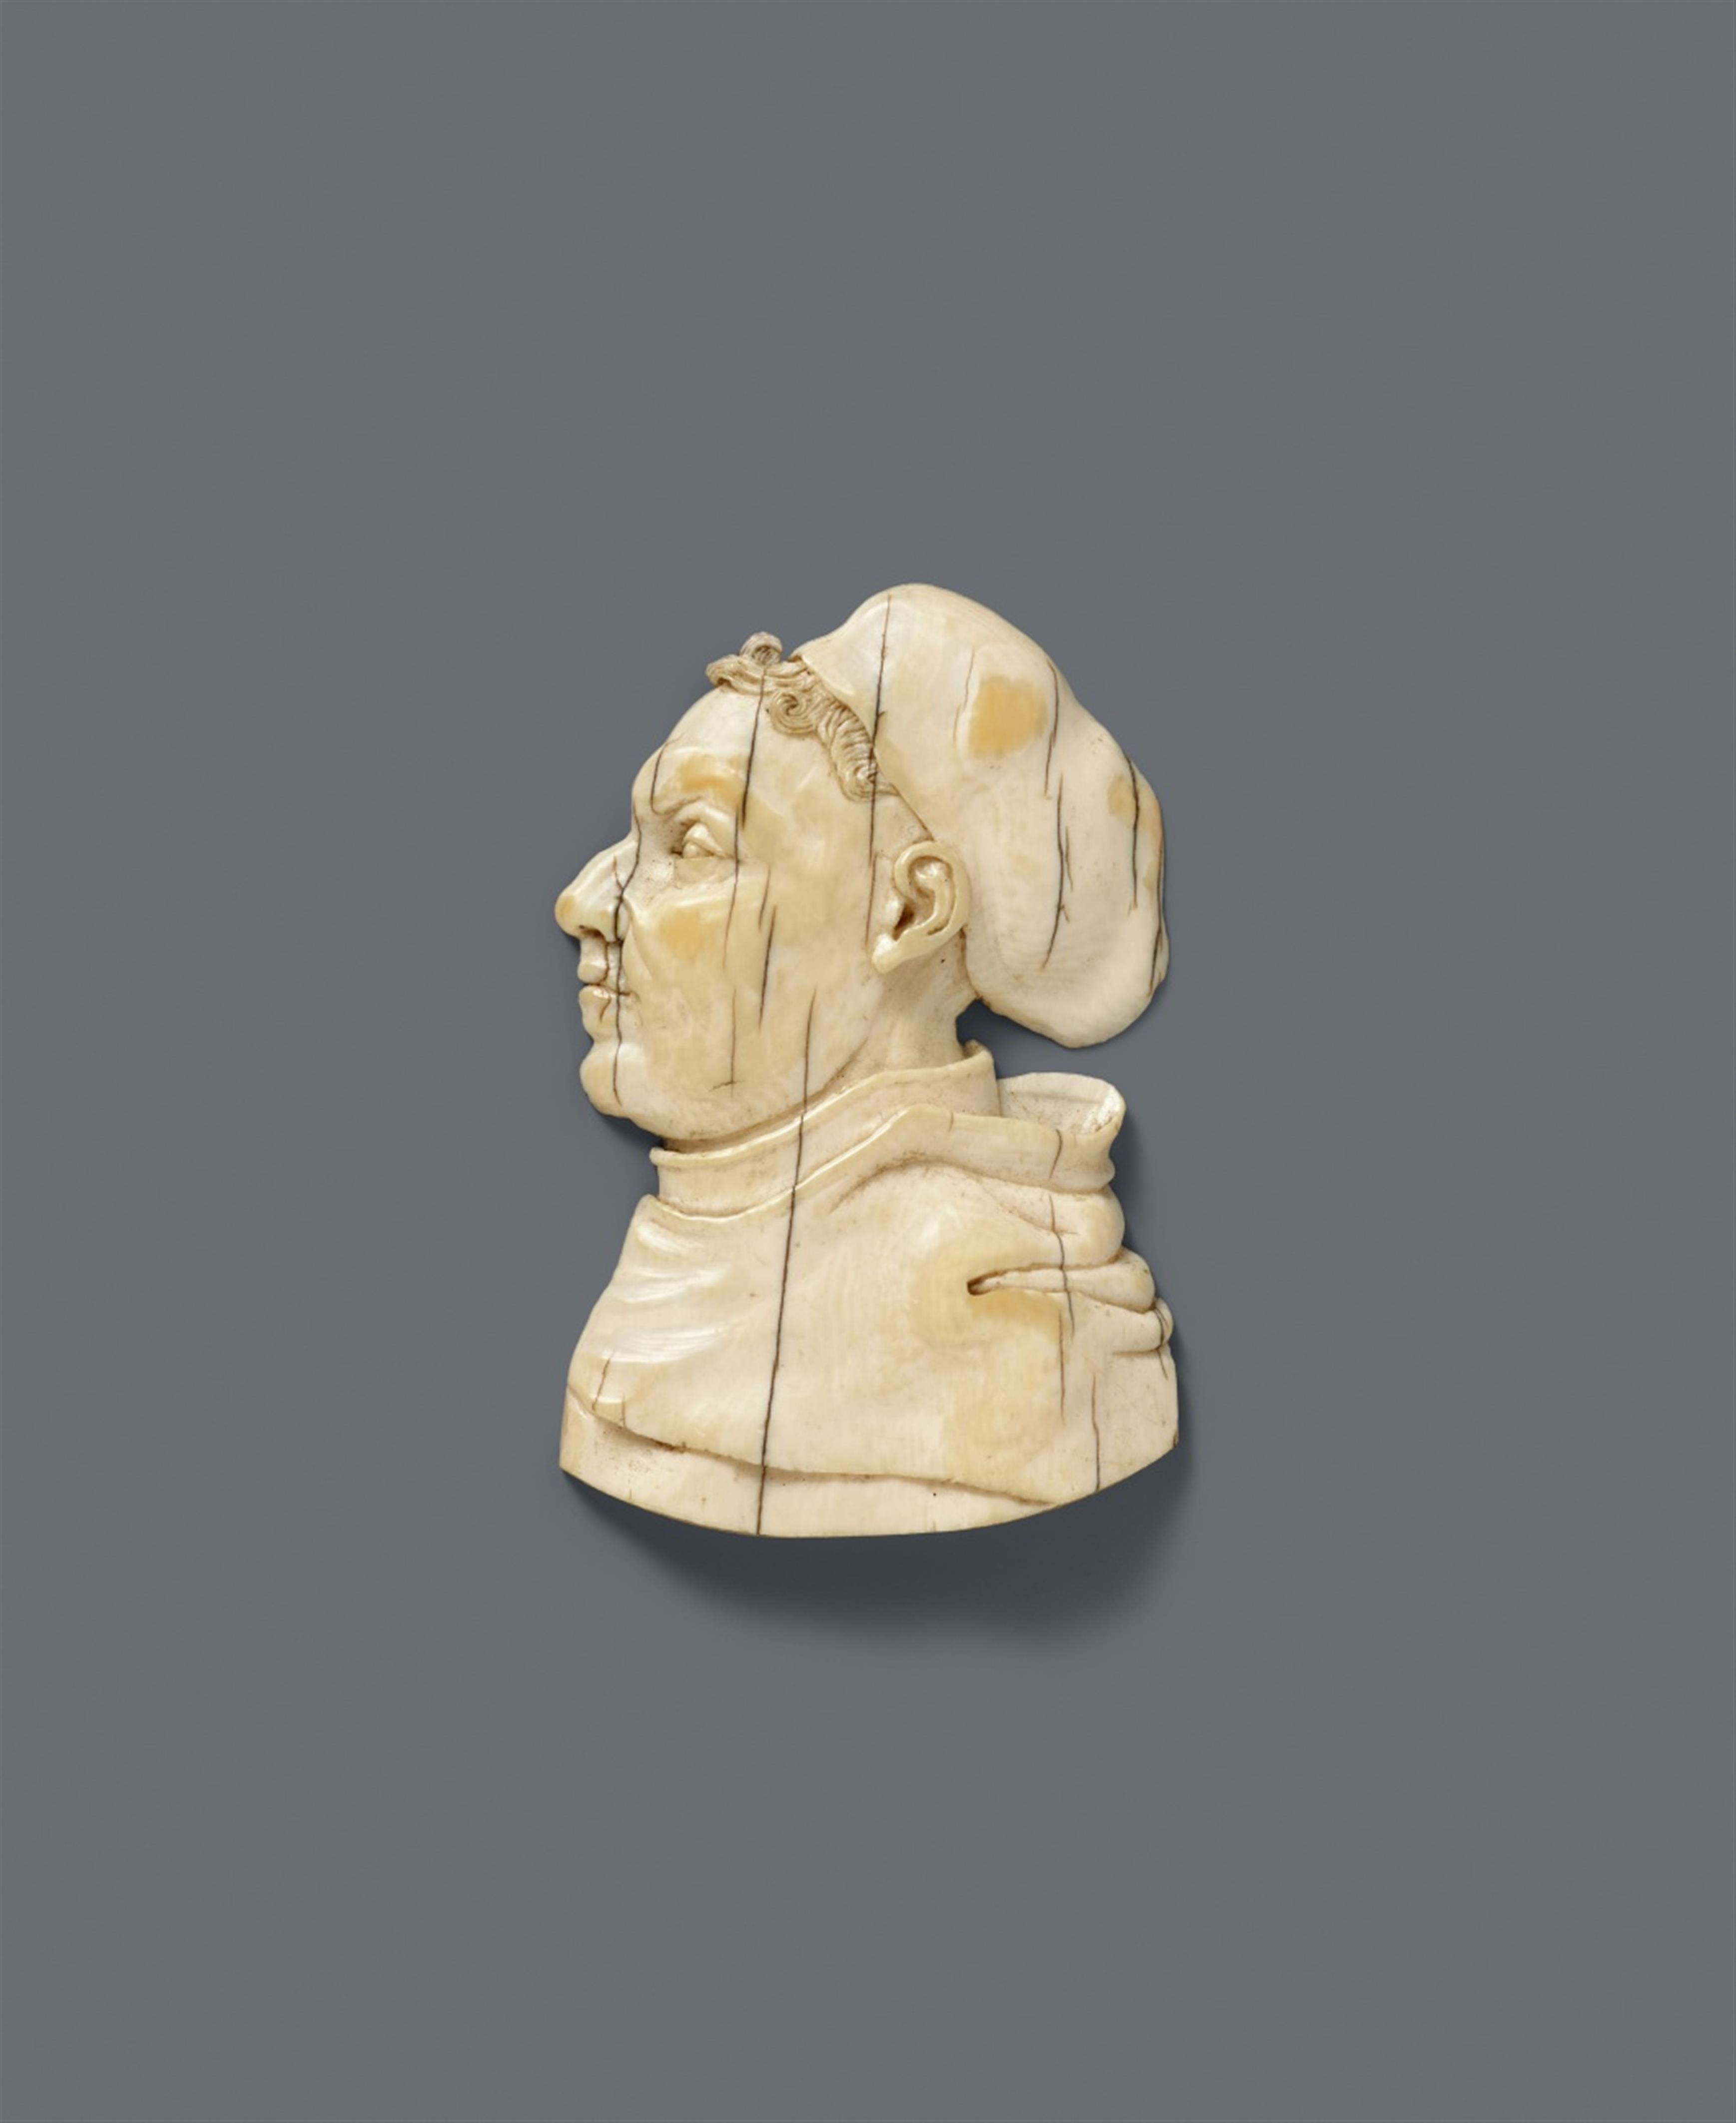 German 17th century - A 17th century German carved ivory portrait of Martin Luther - image-1